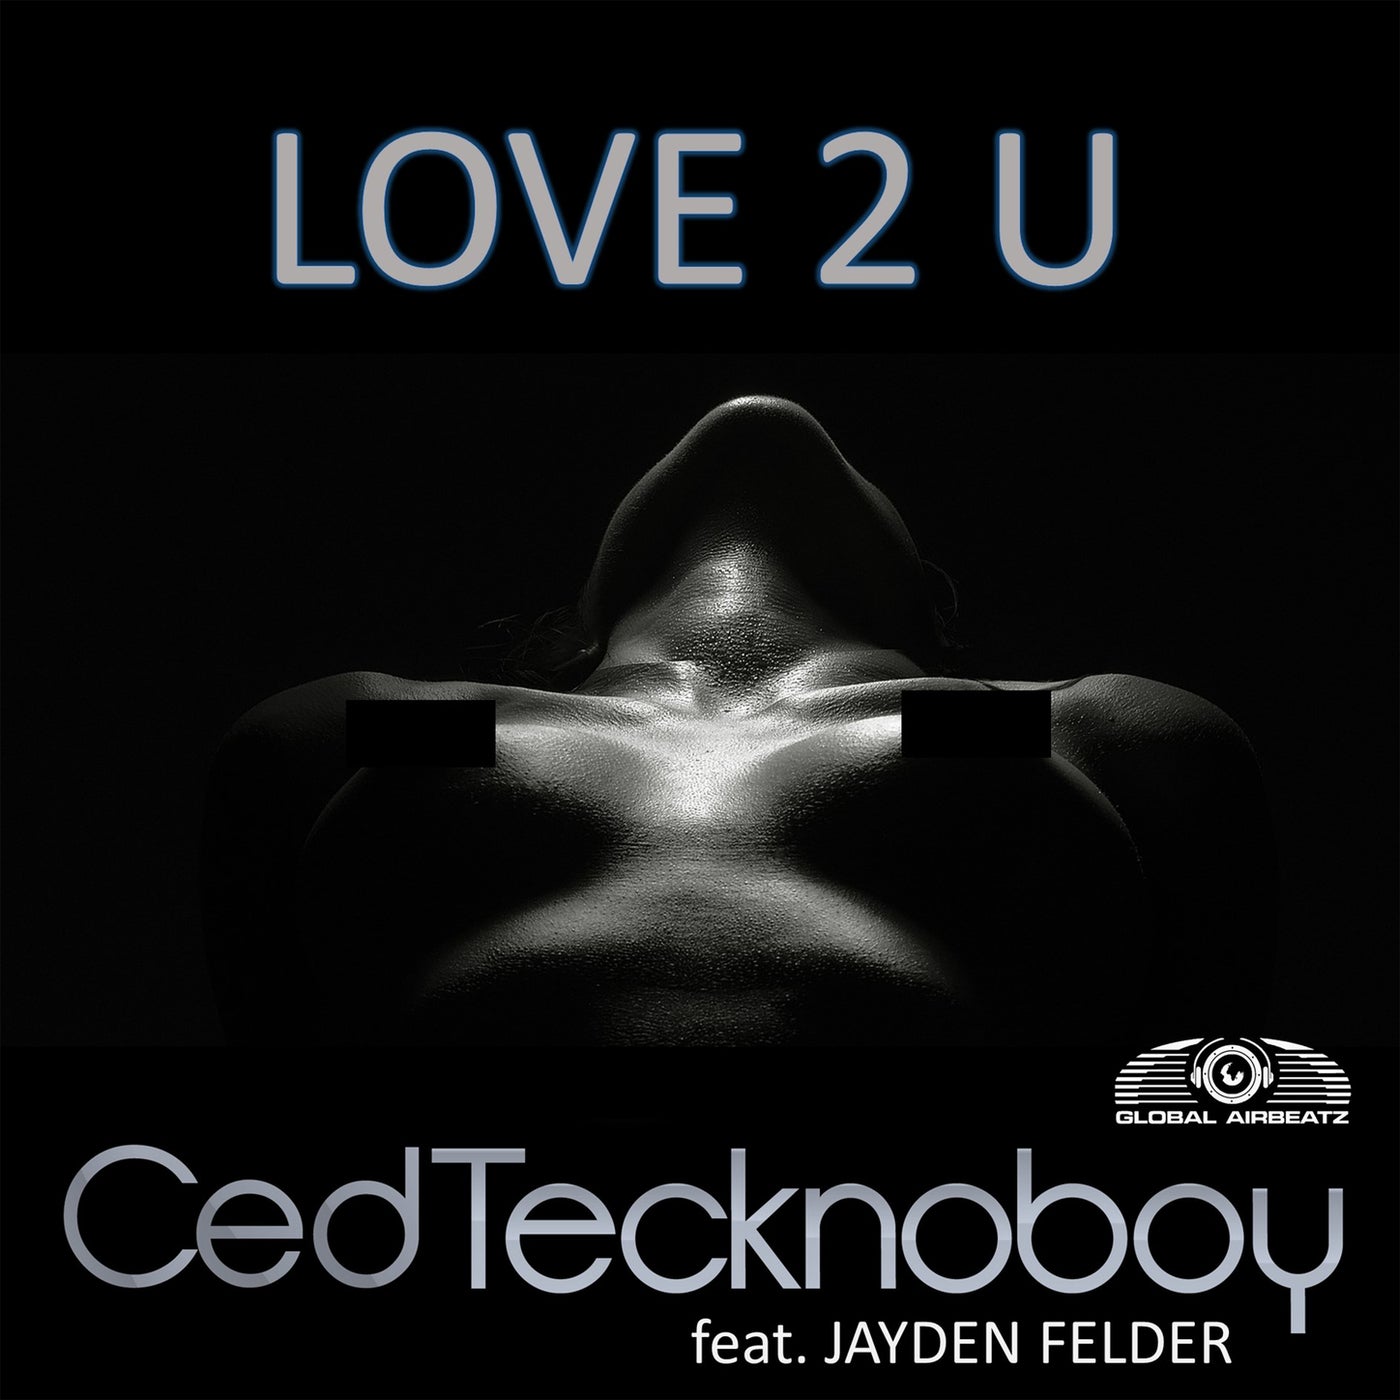 Love 2 U (Extended Mix)